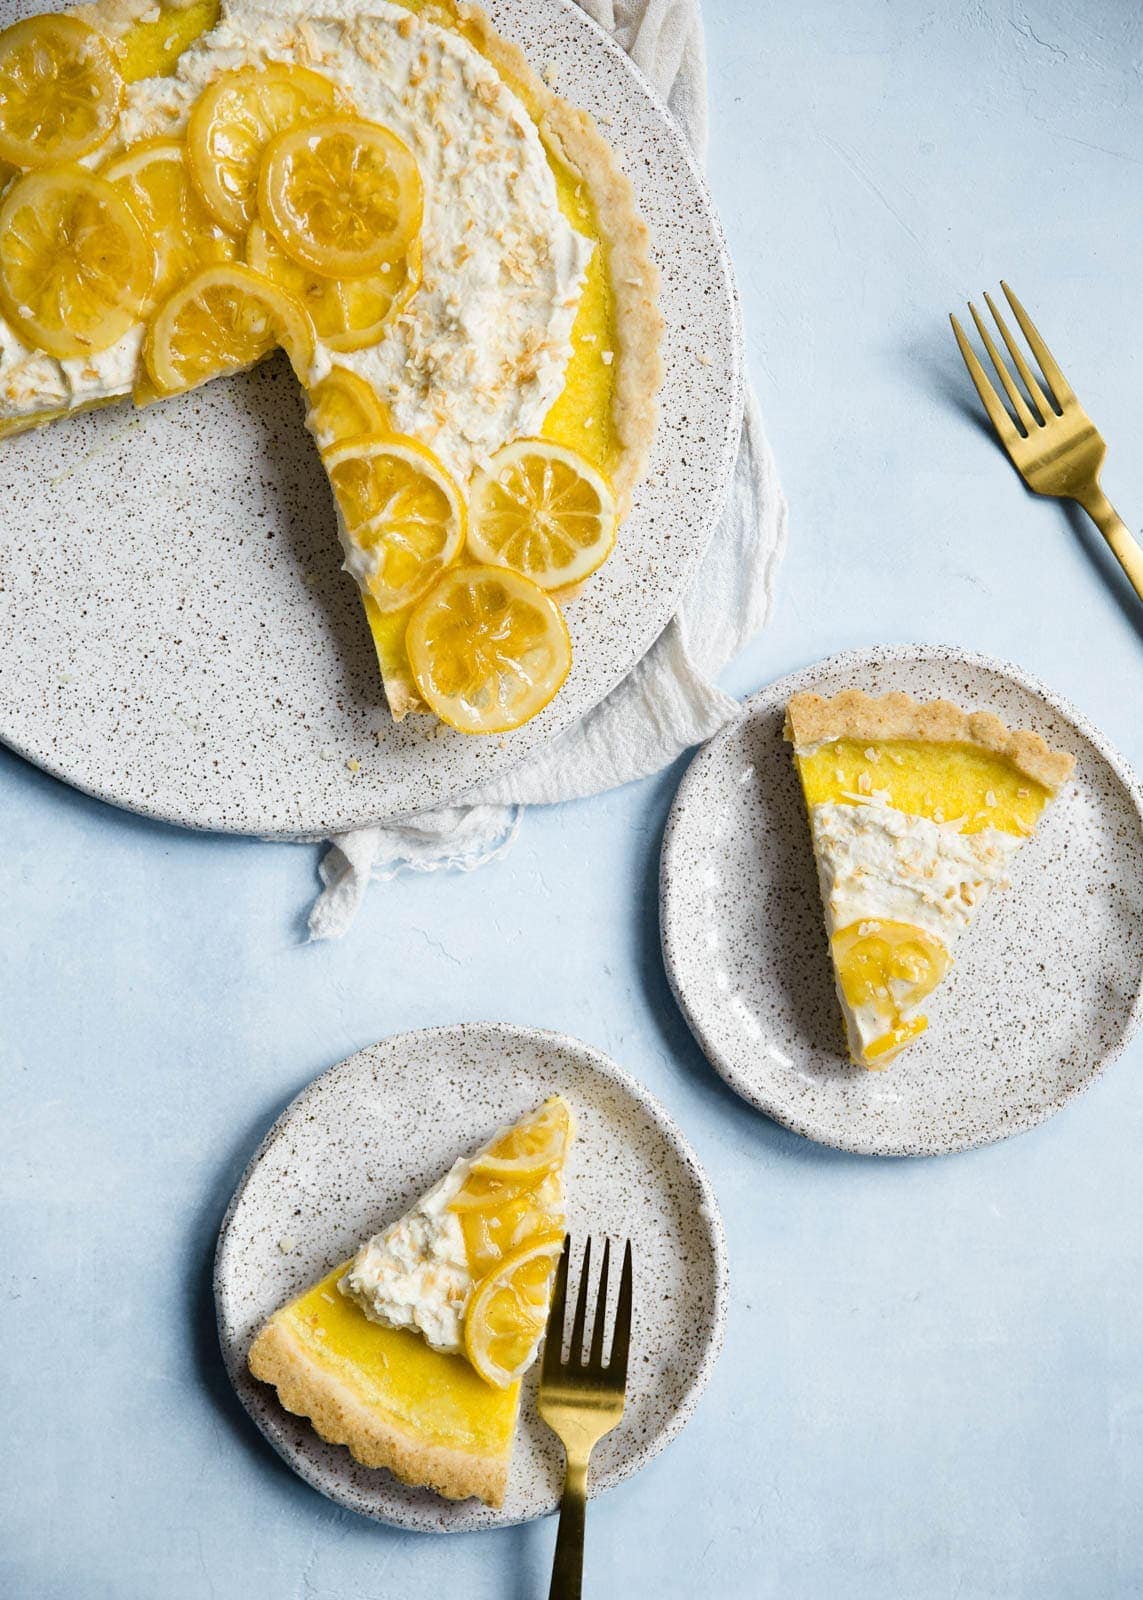 Lemon Coconut Tart with whipped vanilla bean crème fraîche and candied lemons